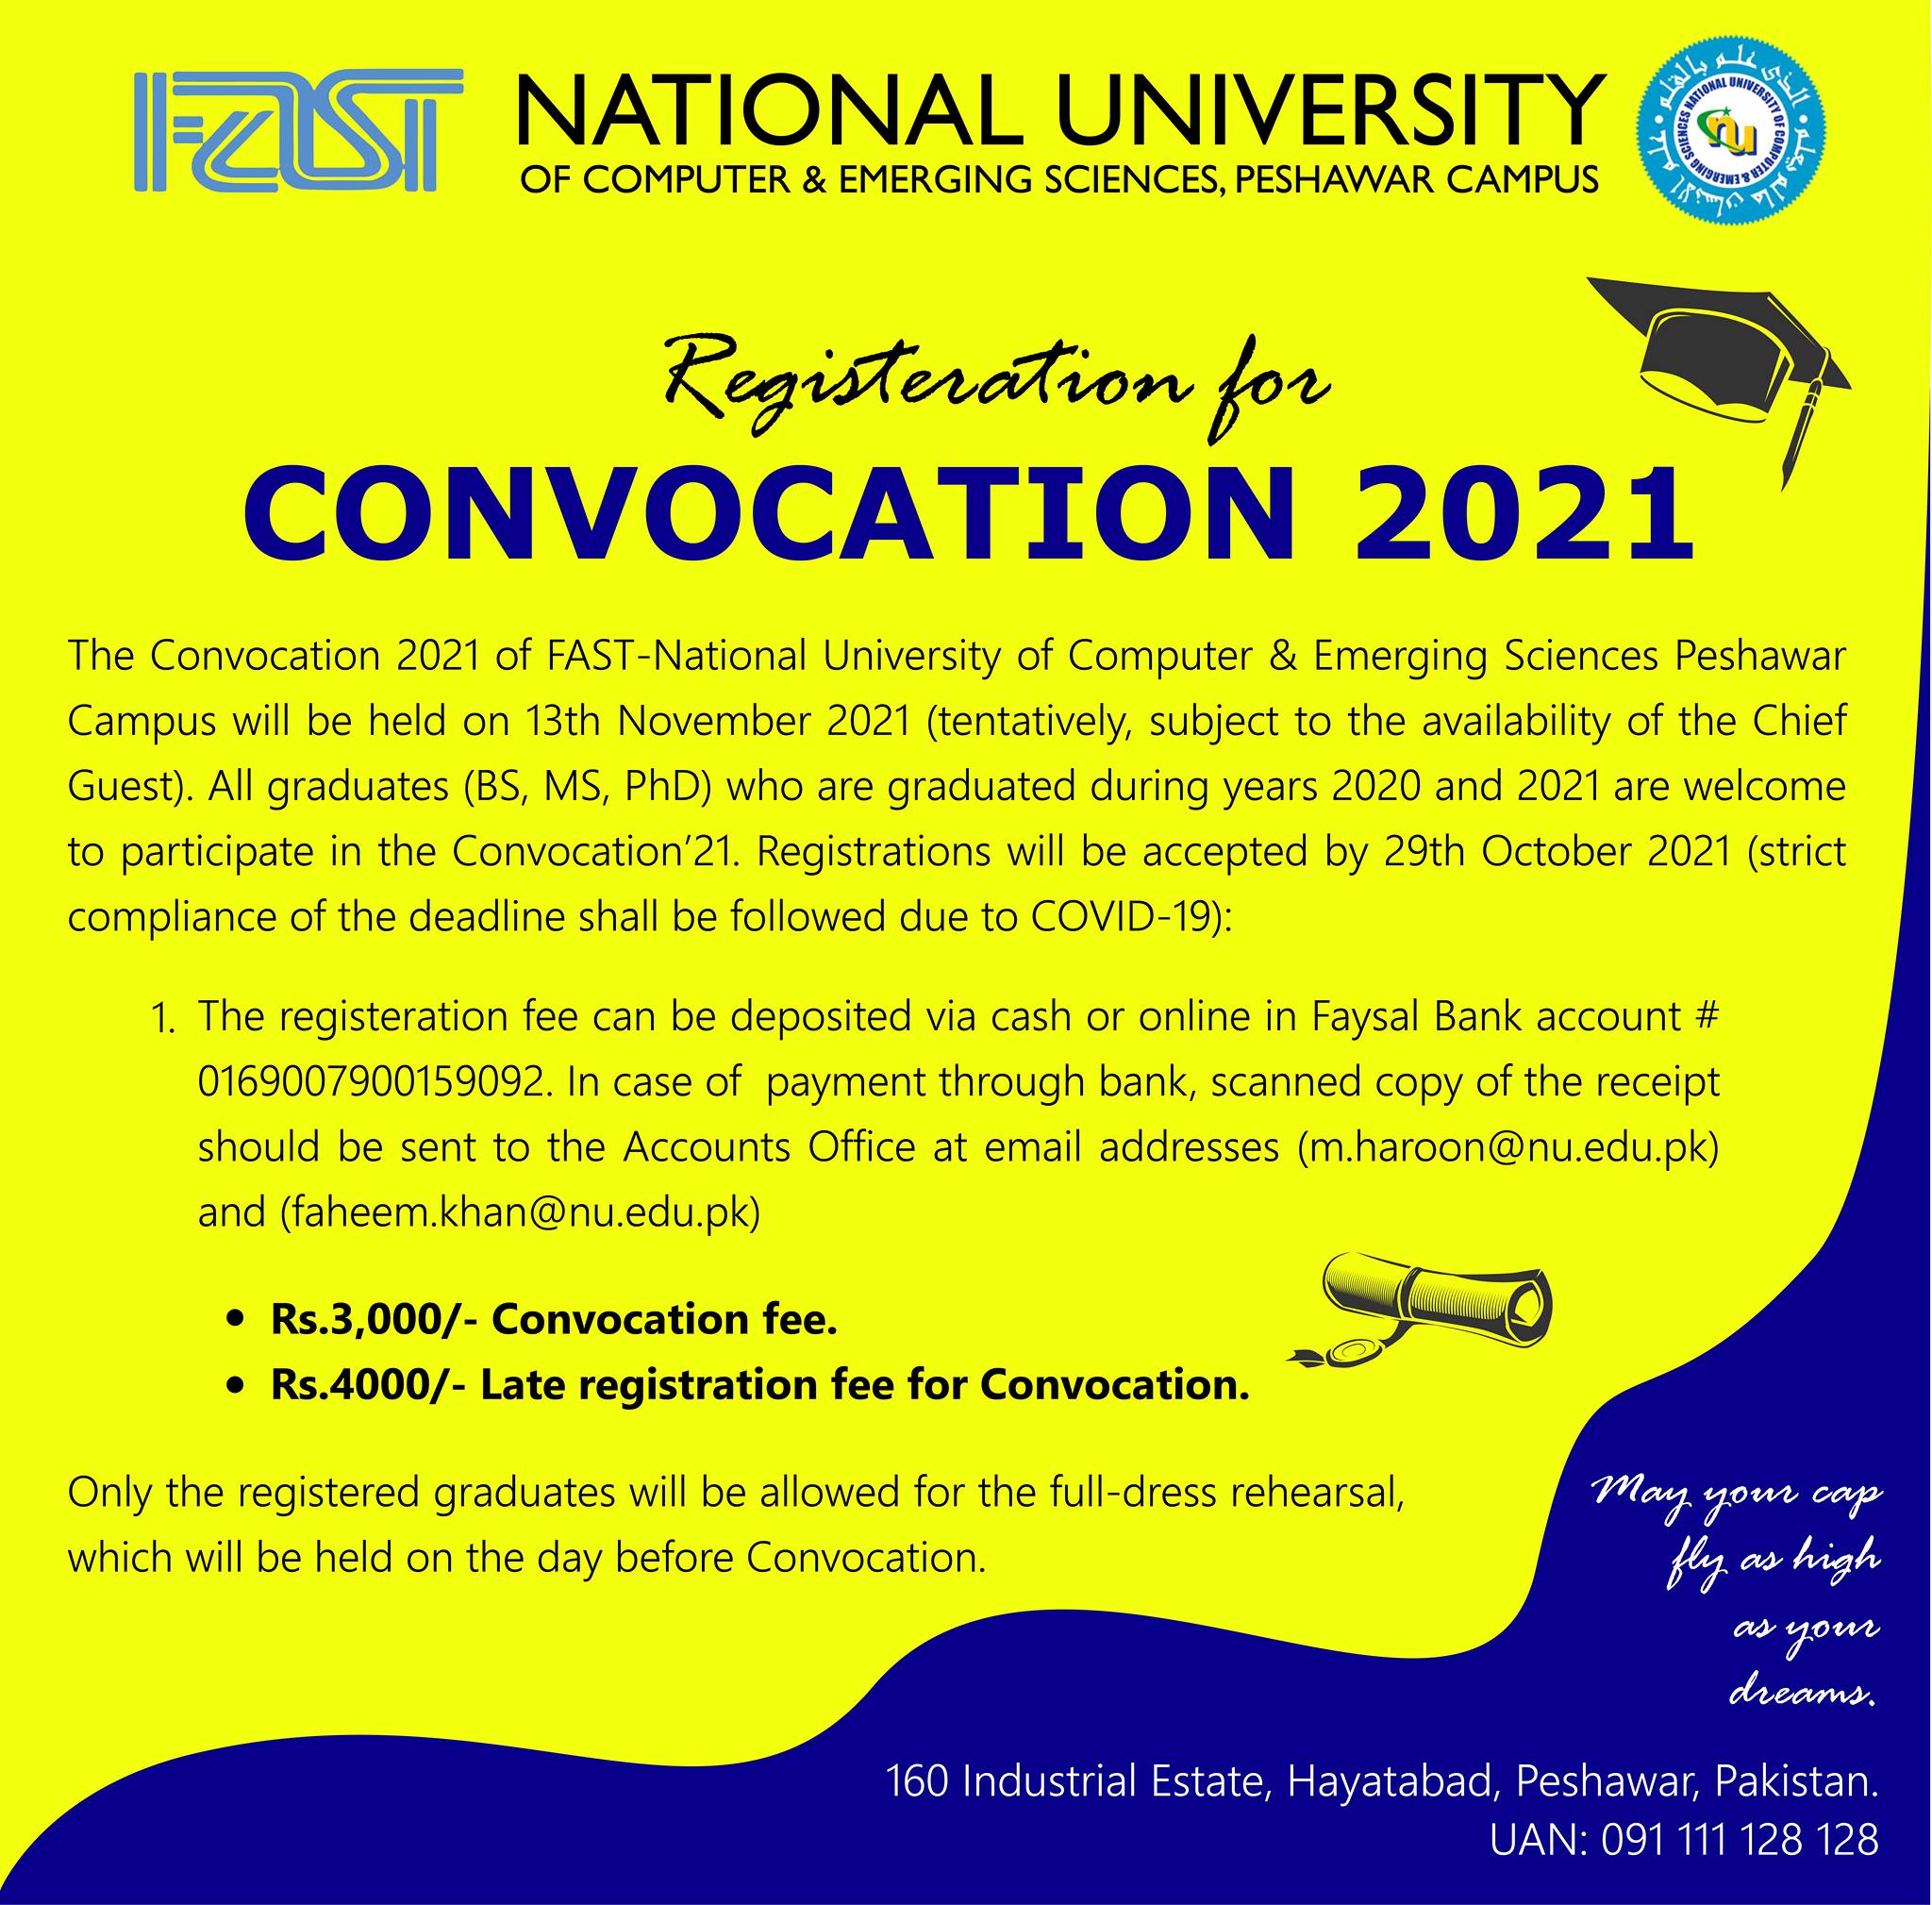 convocation will be held on 13th November 2021